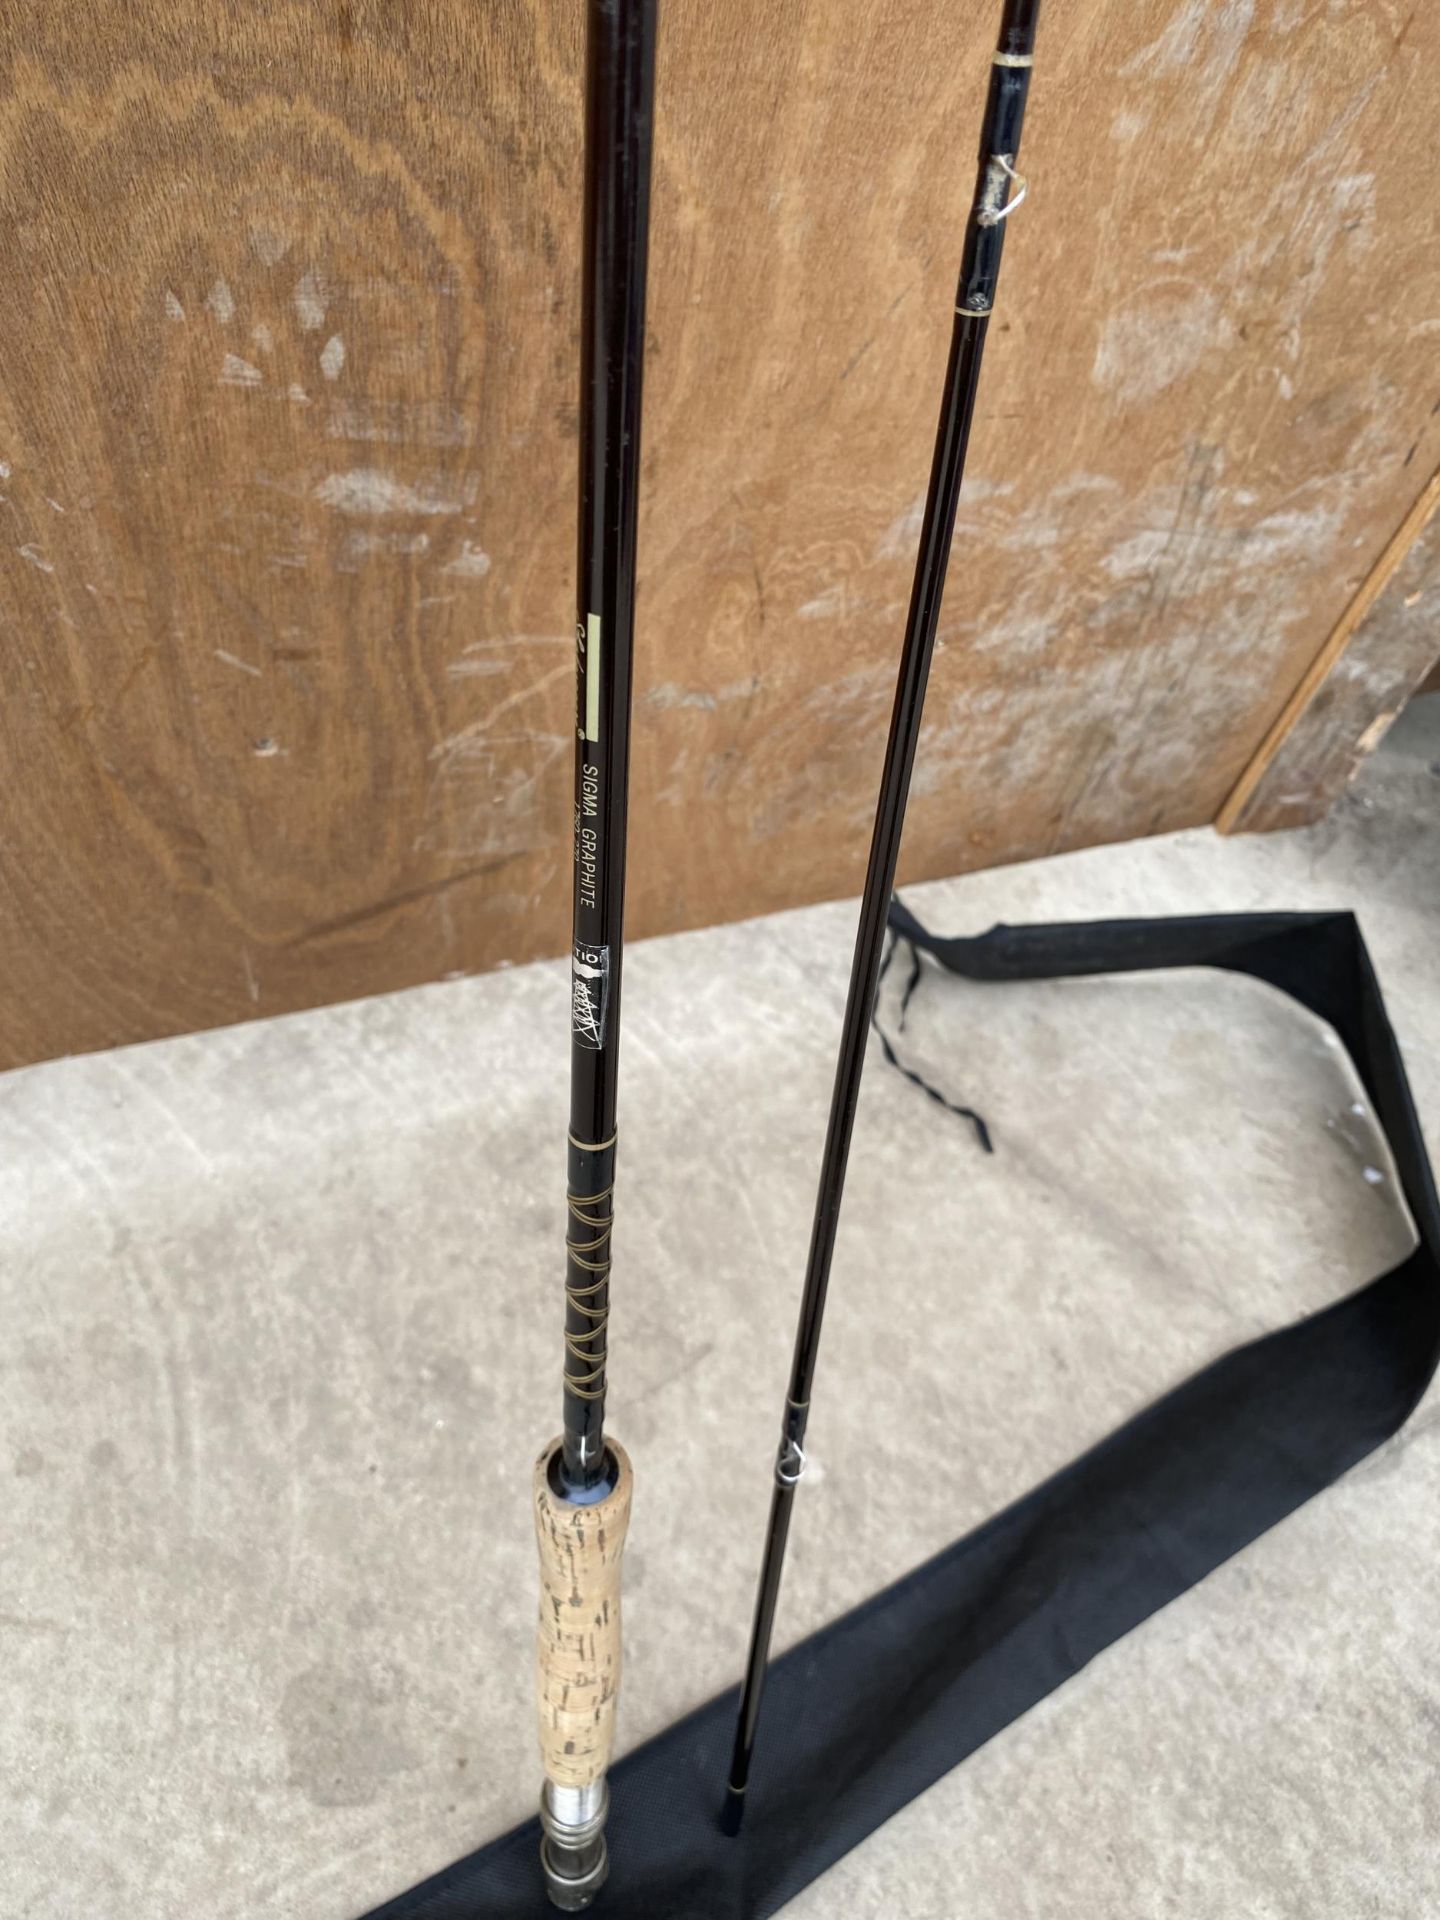 TWO FLY FISHING RODS CONSISTING OF AN ASTROBLACK 9'6" 8-9# AND A SHAKESPERE SIGMA GRAPHITE 8'10" 6- - Image 7 of 9